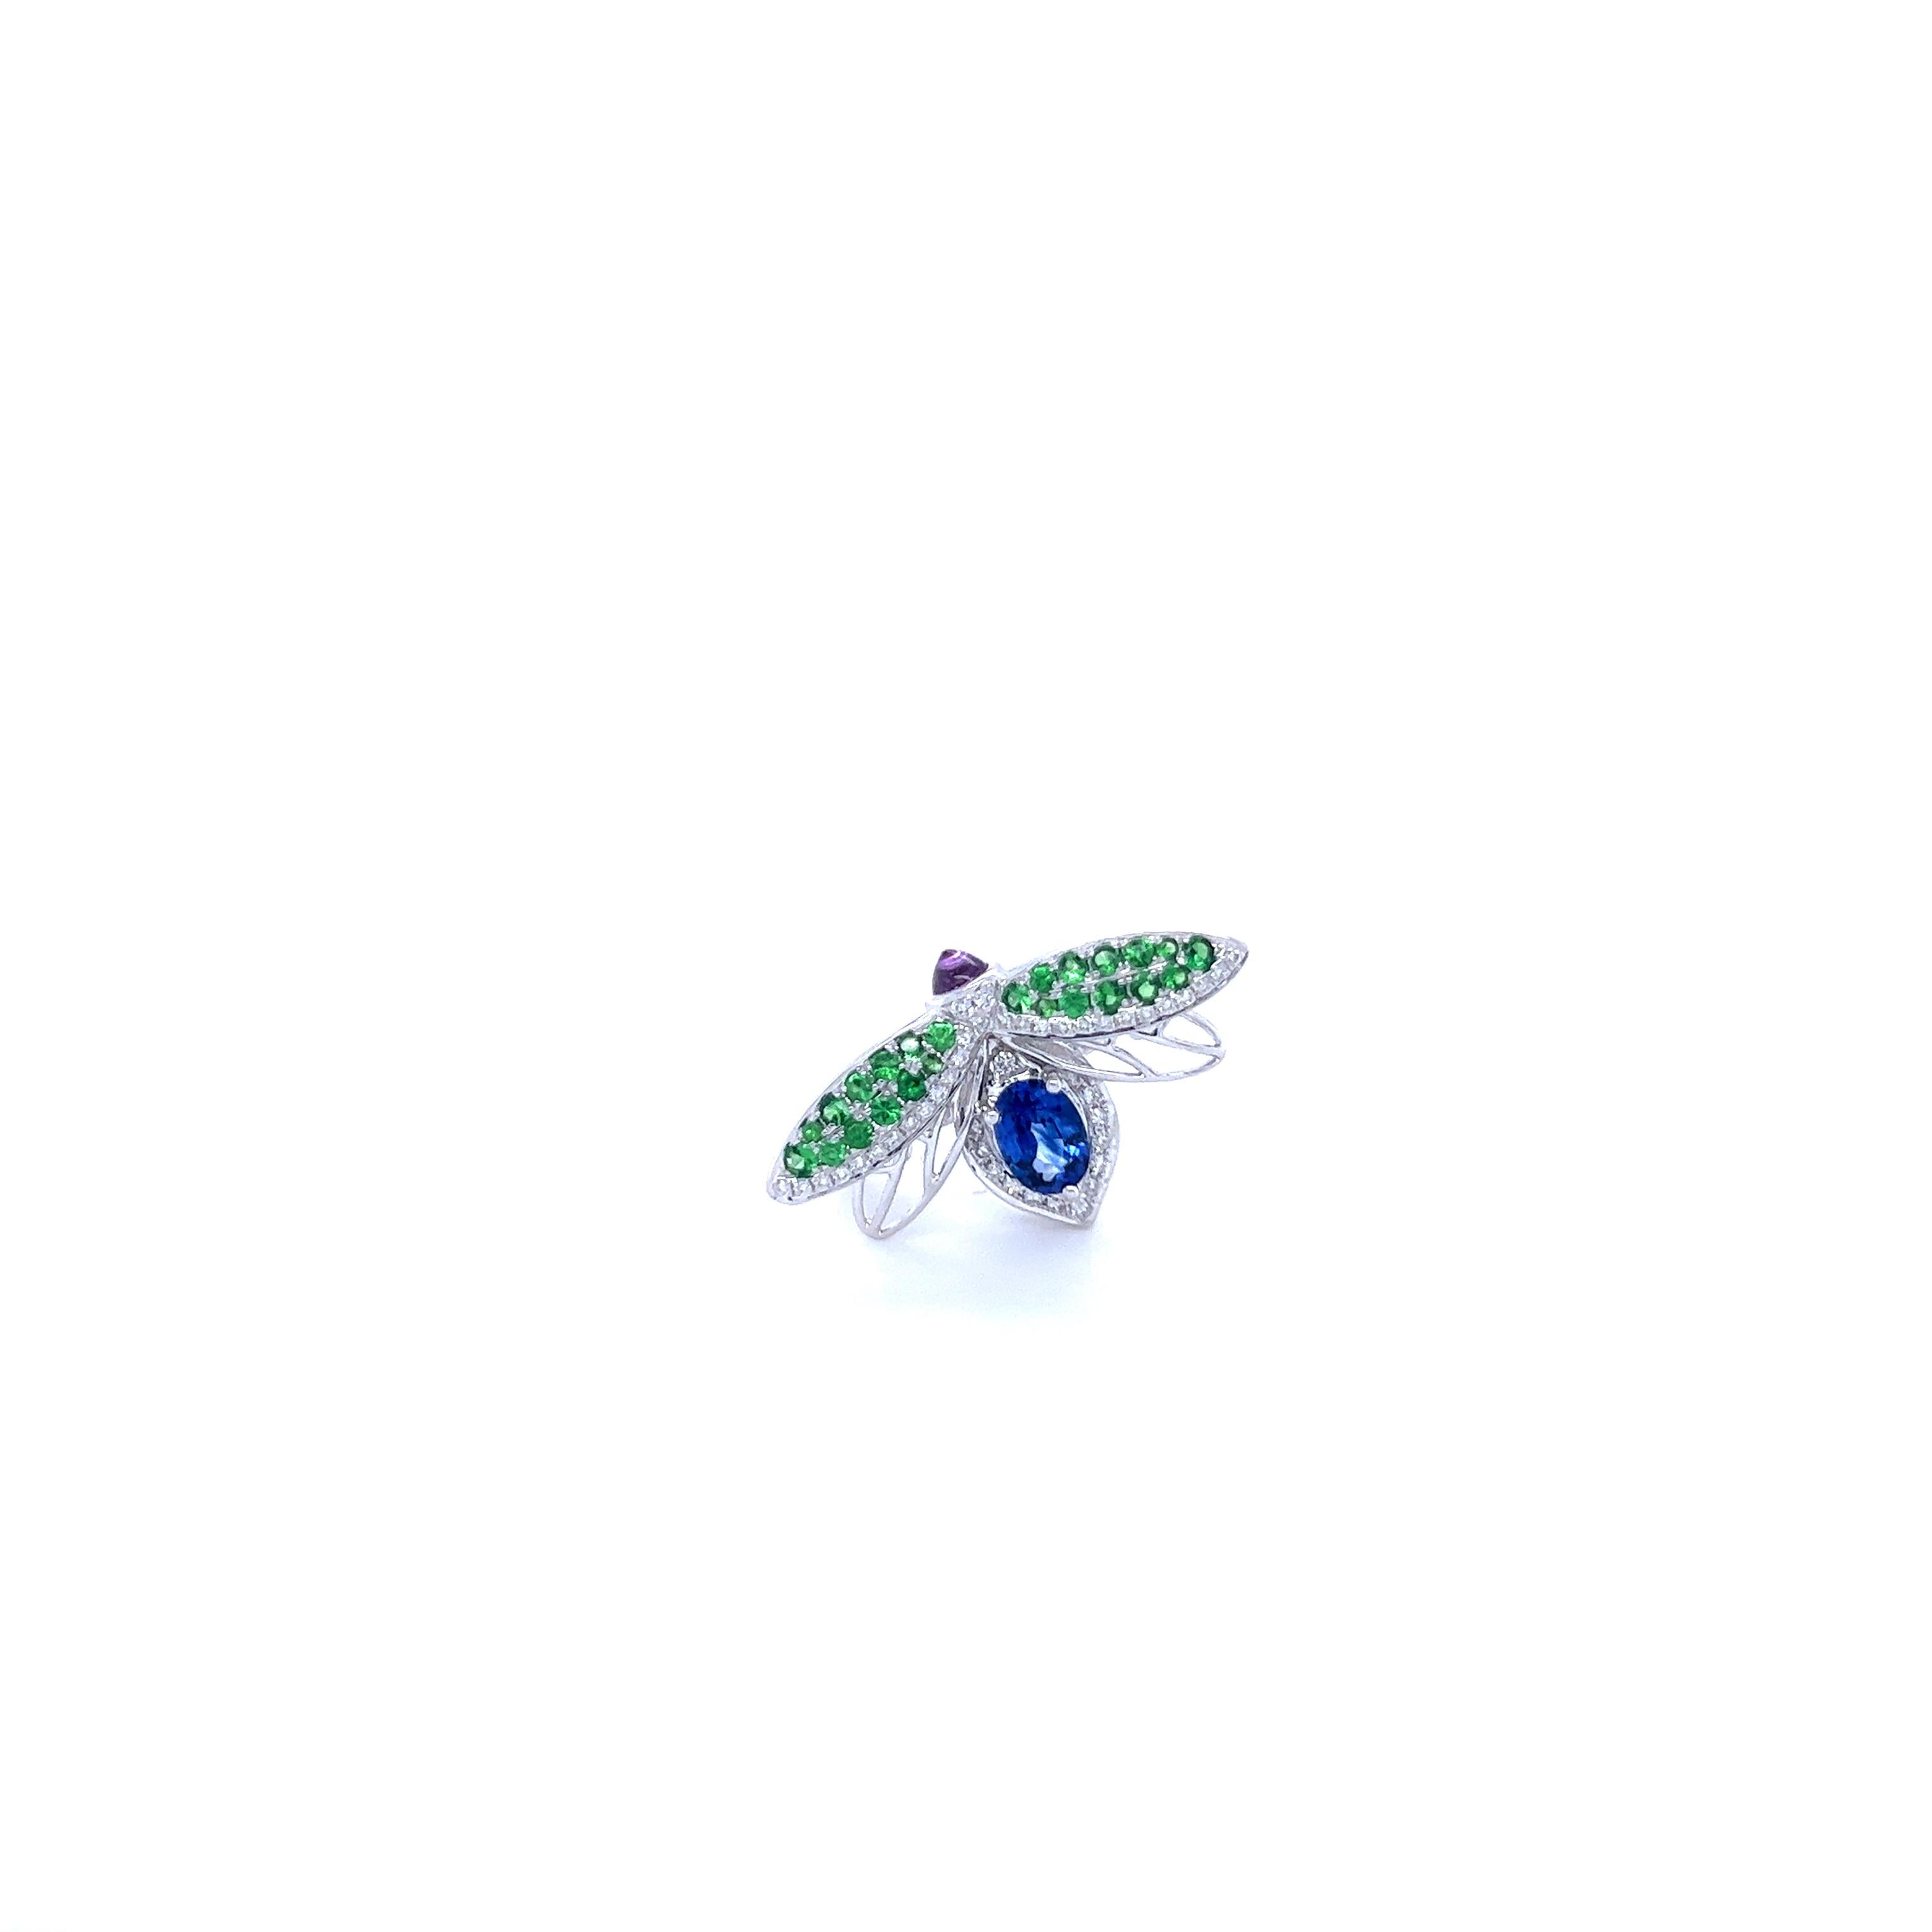 18 K White Gold Green Garnet Bee Ring

1 Blue Sapphire 0.36 CT
43 Diamonds 0.16 CT
24 Green Garnets 0.36 CT
1 Purple Sapphire 0.24 CT
18 K White Gold 3.98 GM

Green and glowing, there’s something about this soft or velvet shade that instantly